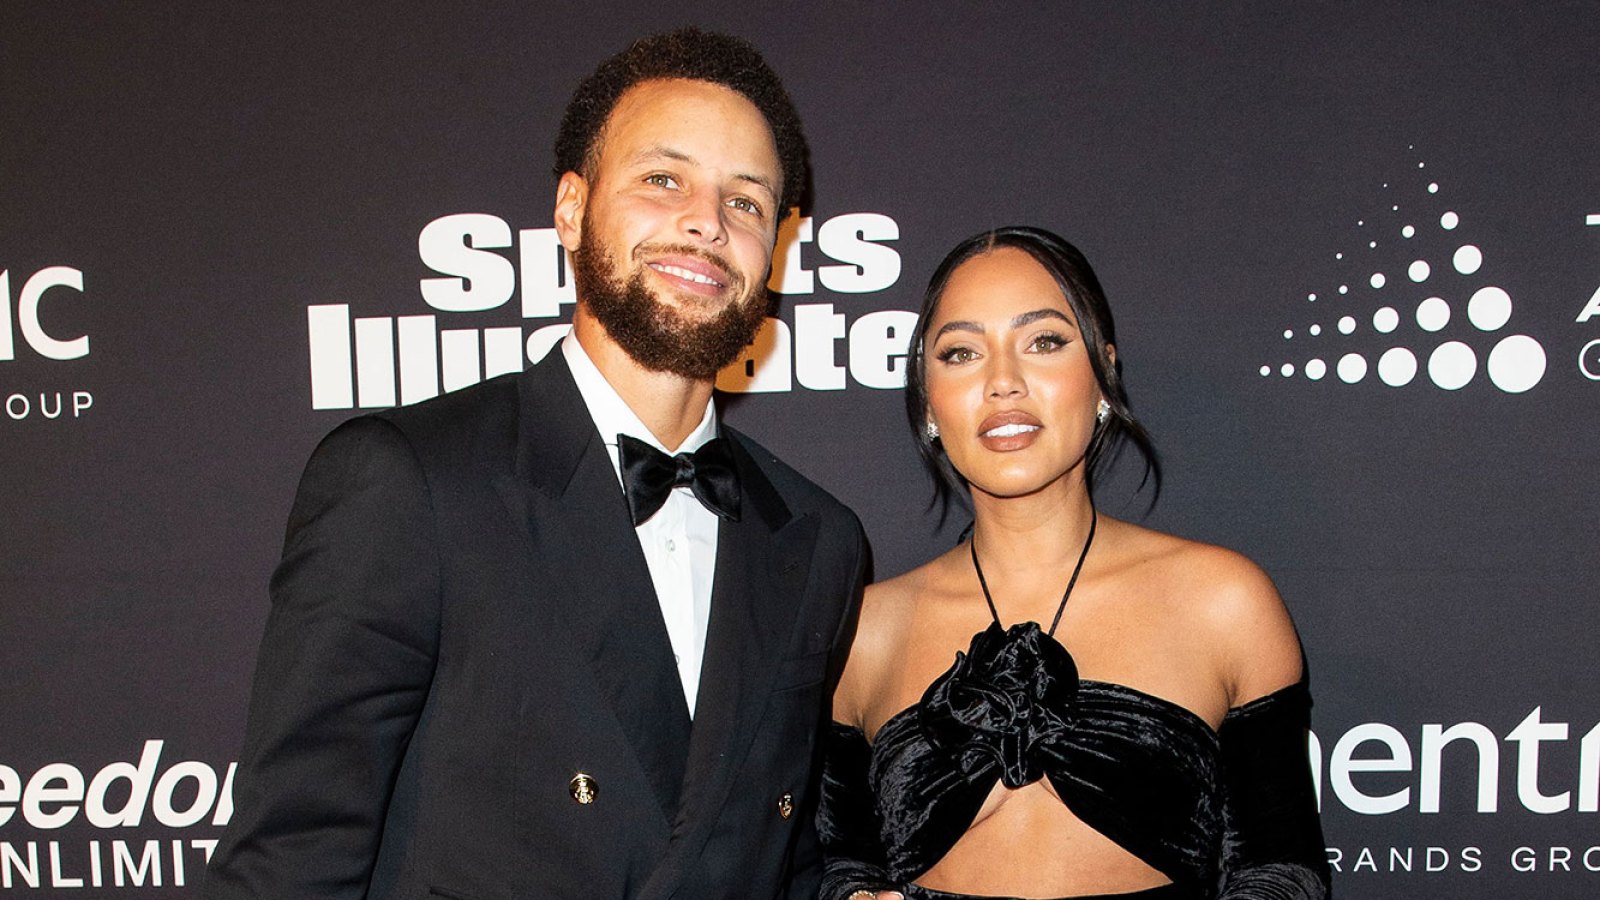 Ayesha Curry Reveals Competing With Husband Steph Curry Was a Hindrance on Her Health Journey